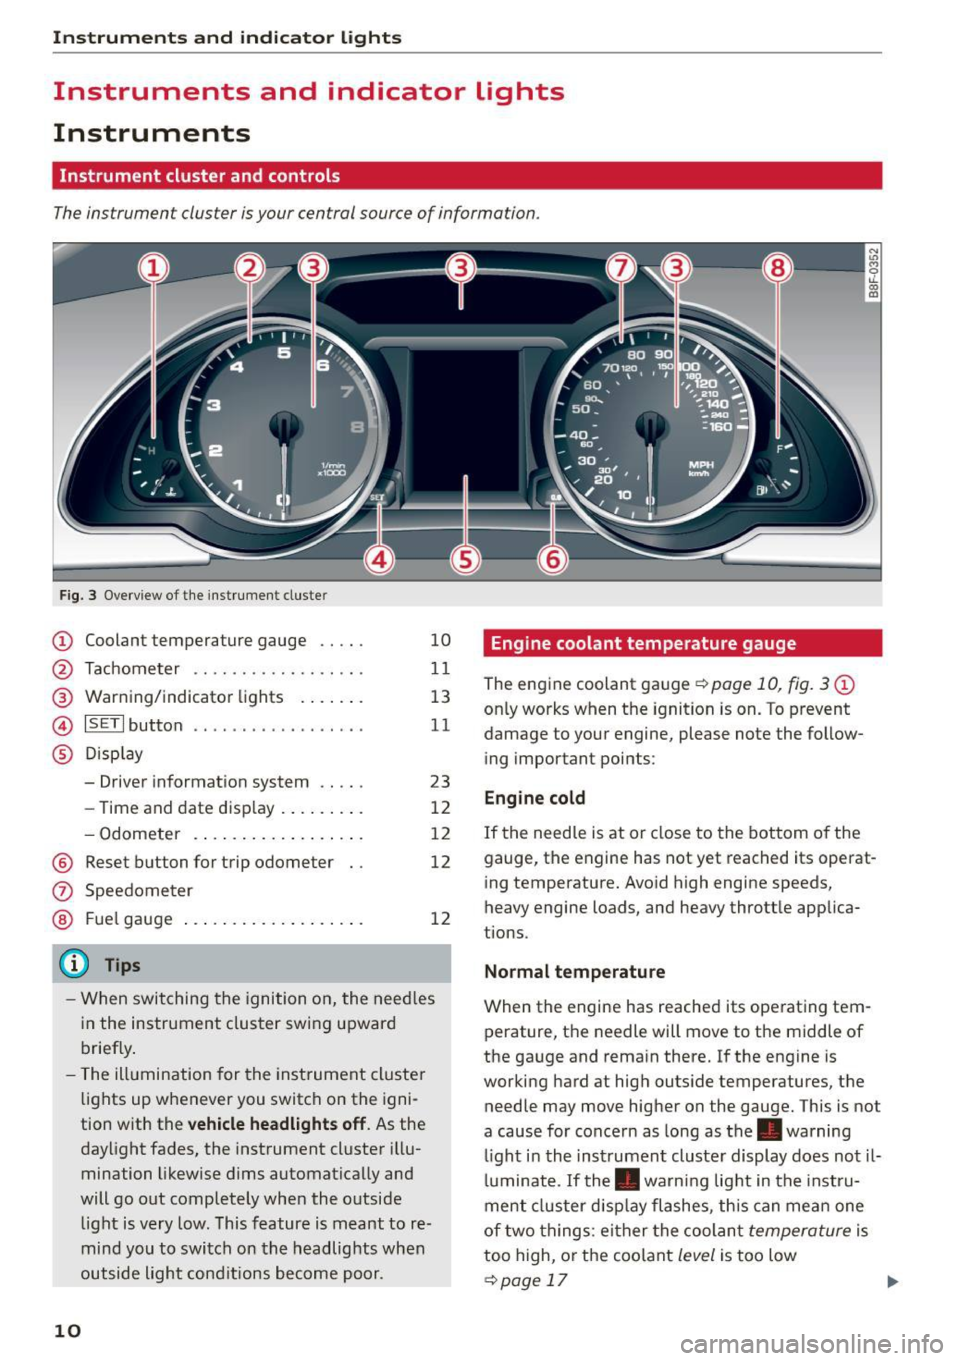 AUDI A5 2015  Owner´s Manual Instruments  and  indicator  Lights 
Instruments  and  indicator  Lights 
Instruments 
Instrument  cluster  and  controls 
The instrument  cluster  is your  central source  of  information. 
Fig.  3  